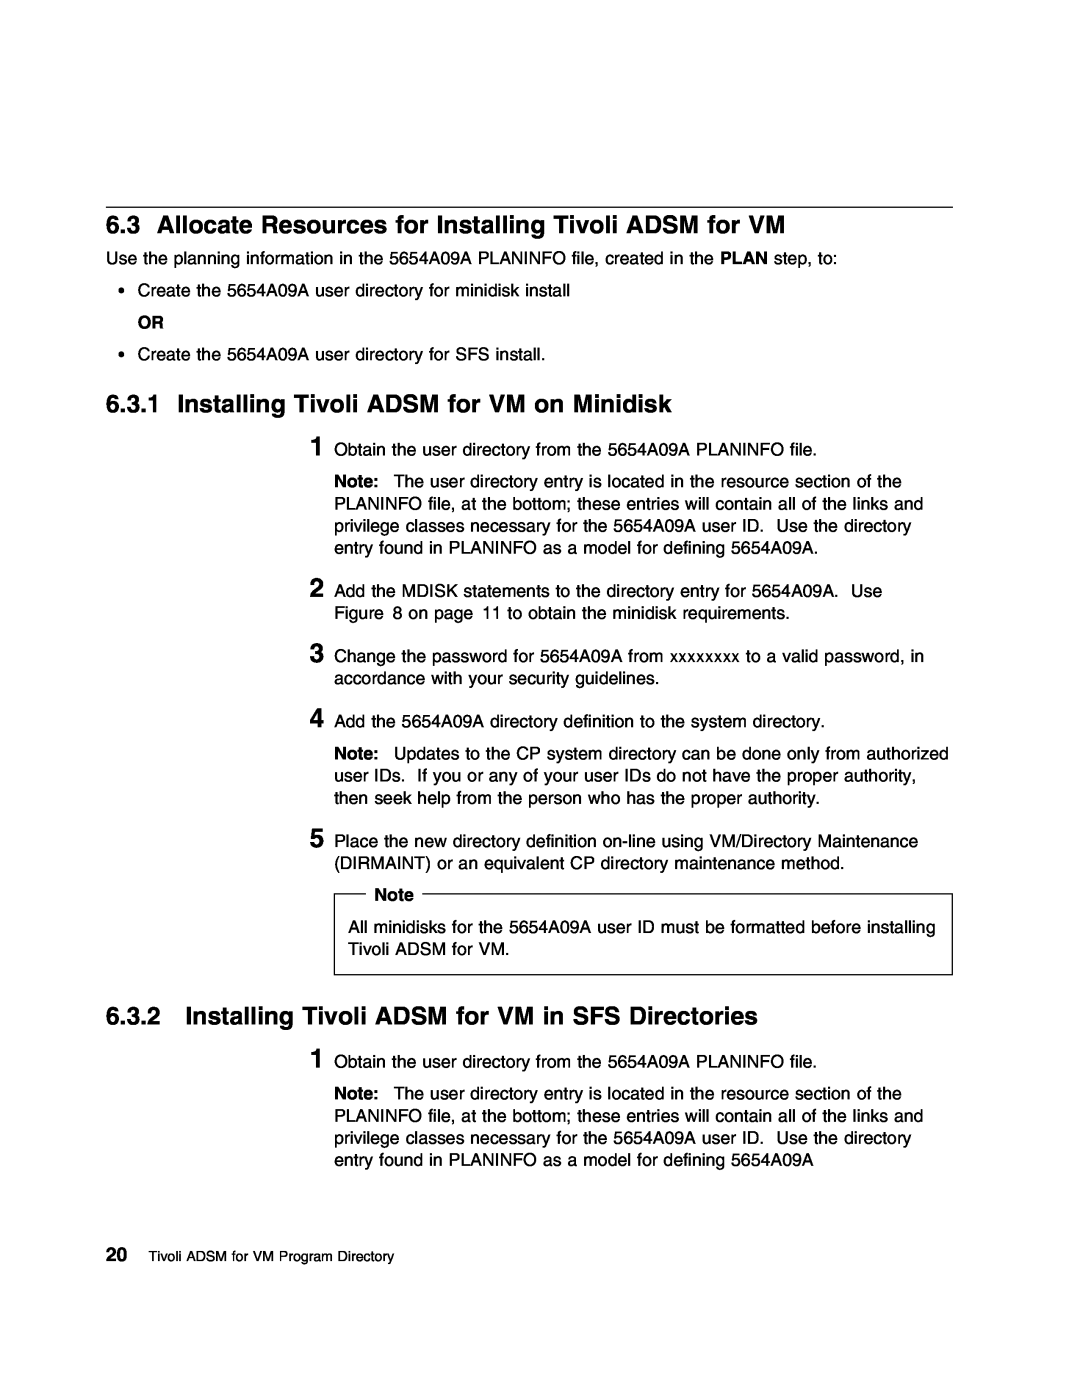 IBM 5697-VM3 manual Allocate Resources for Installing Tivoli ADSM for VM, Installing Tivoli ADSM for VM on Minidisk 